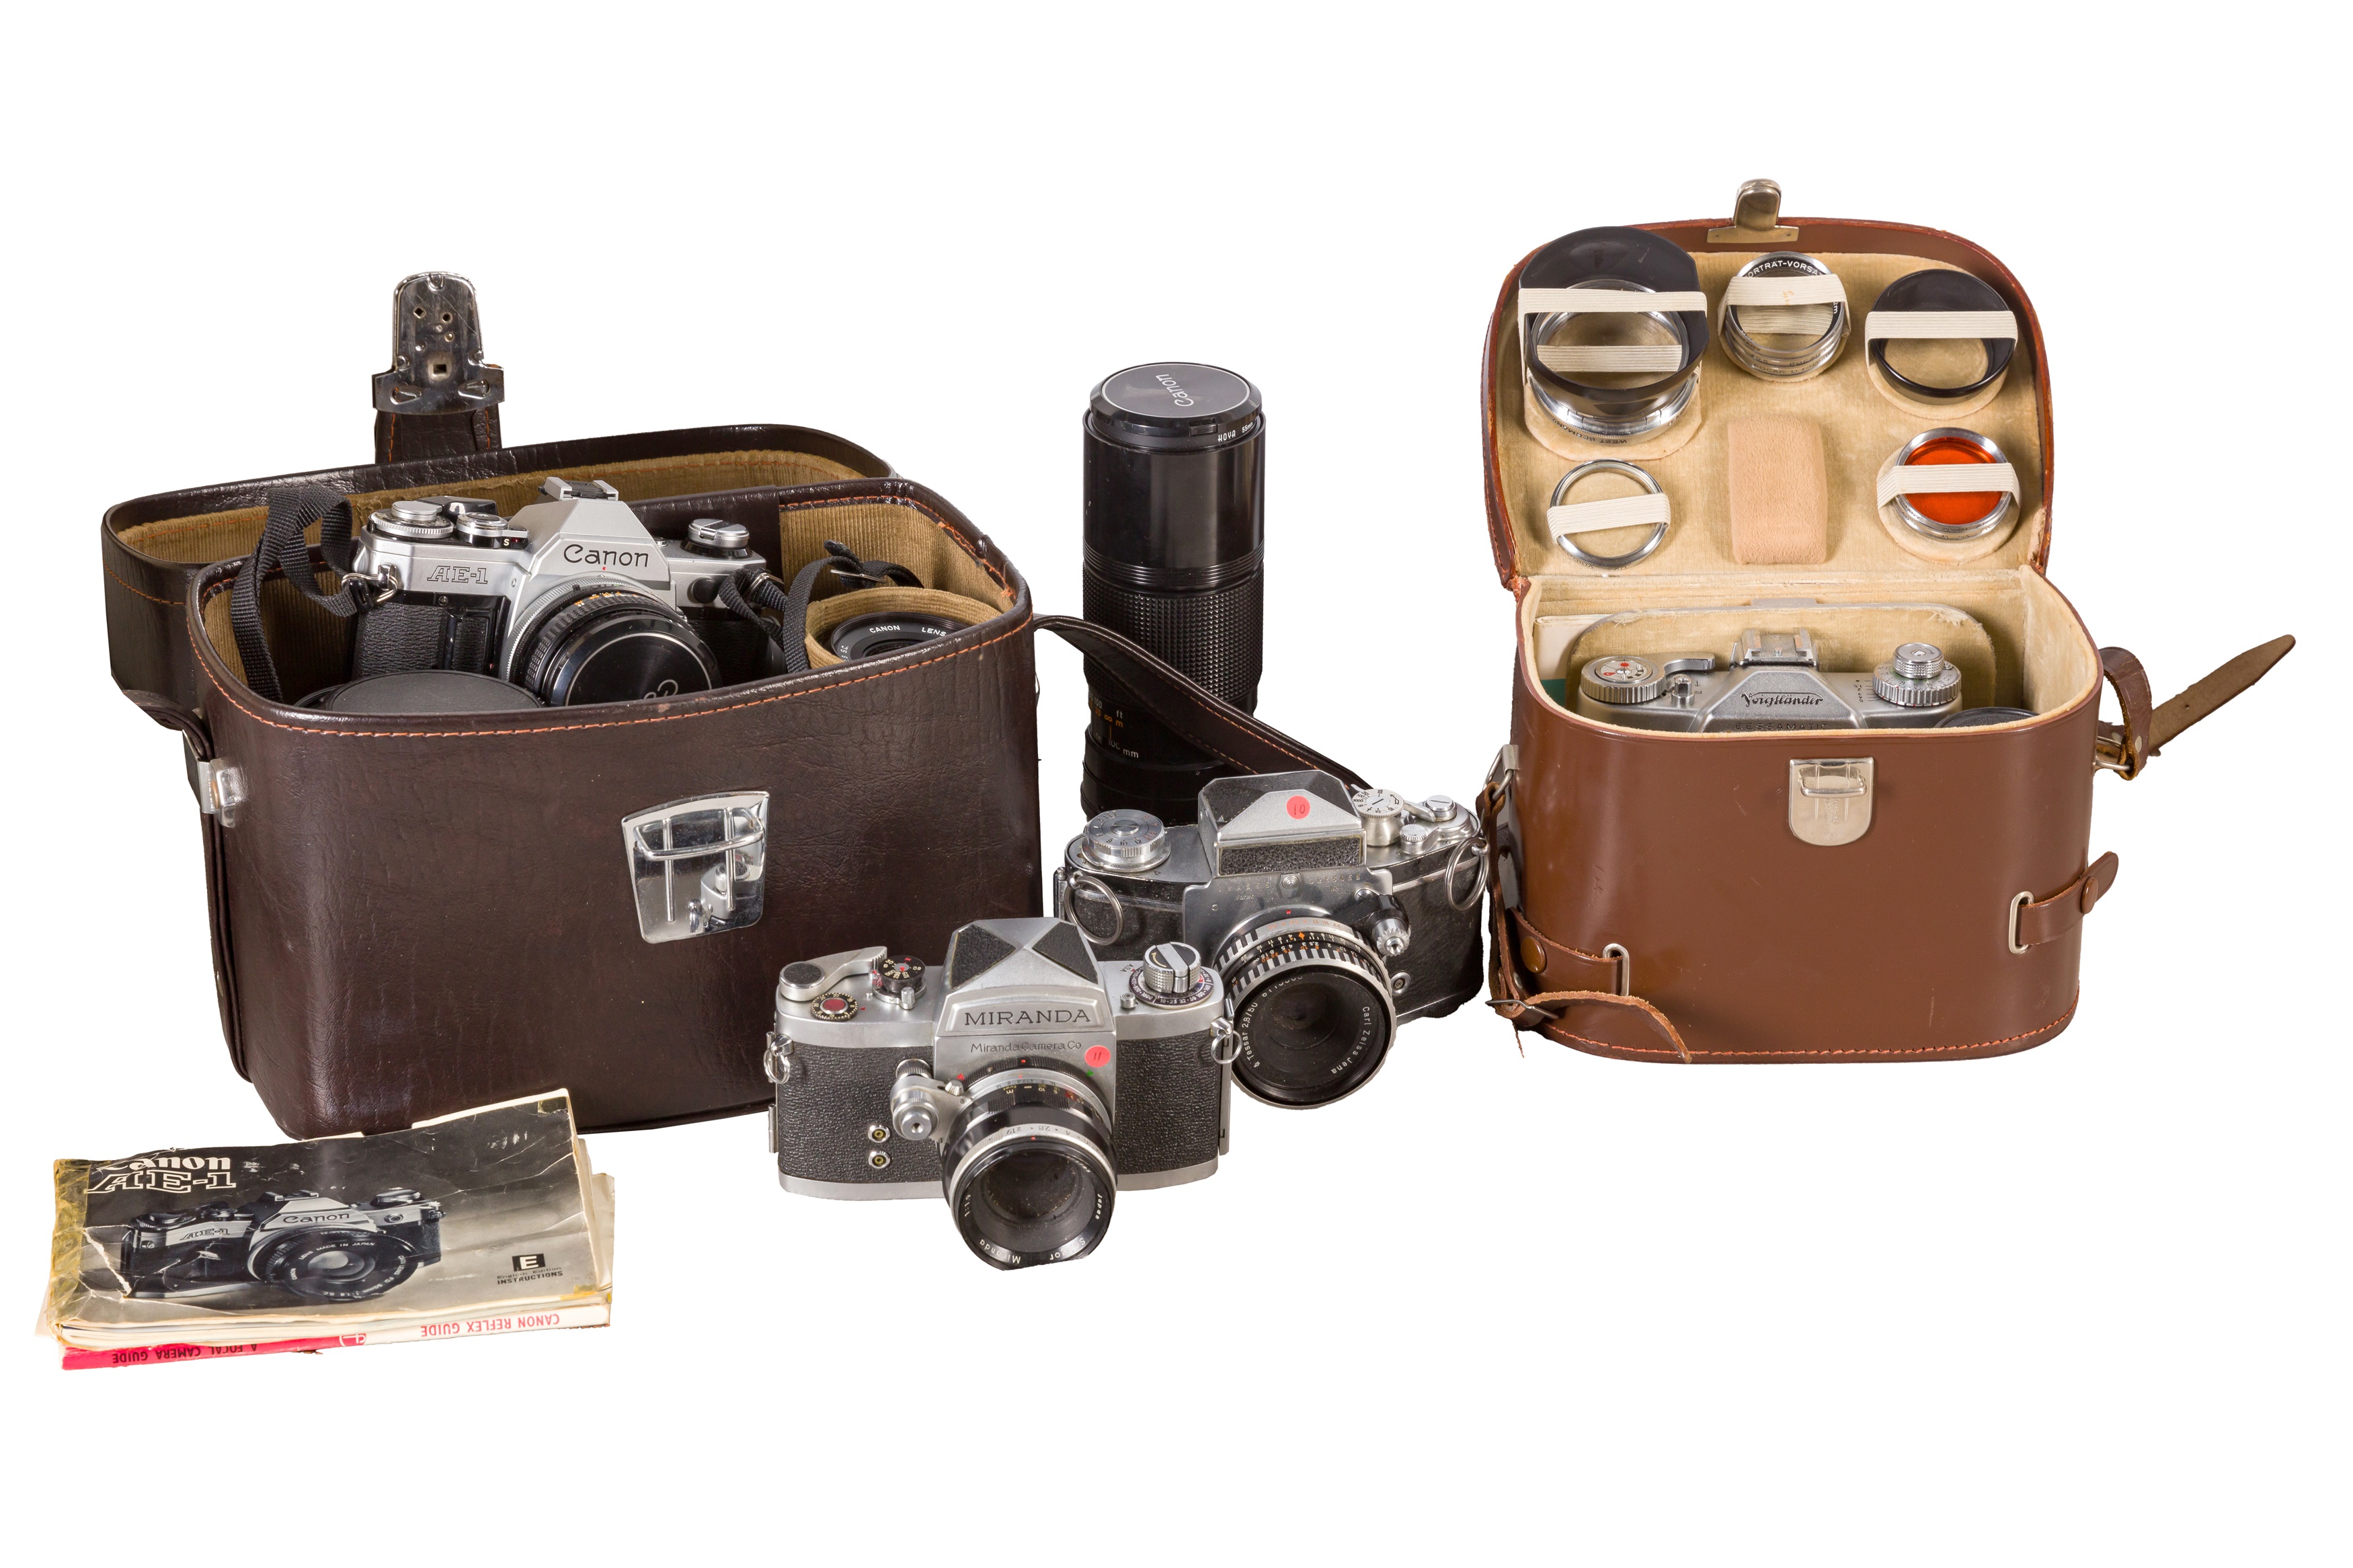 Voigtlander Bessamatic &  Canon AE1 35mm SLR Camera Outfits